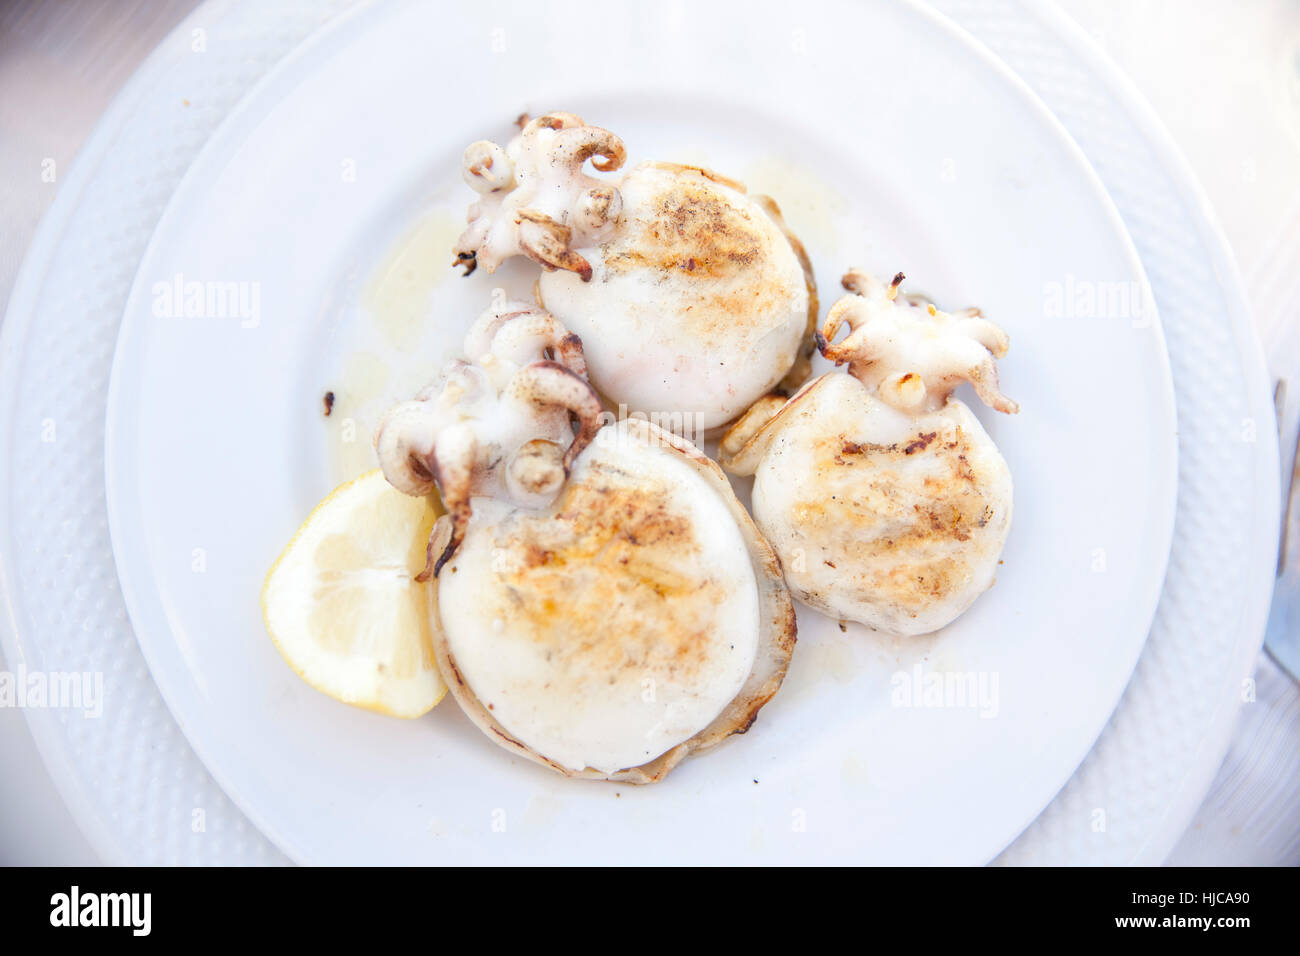 Plate of grilled cuttle fish Stock Photo